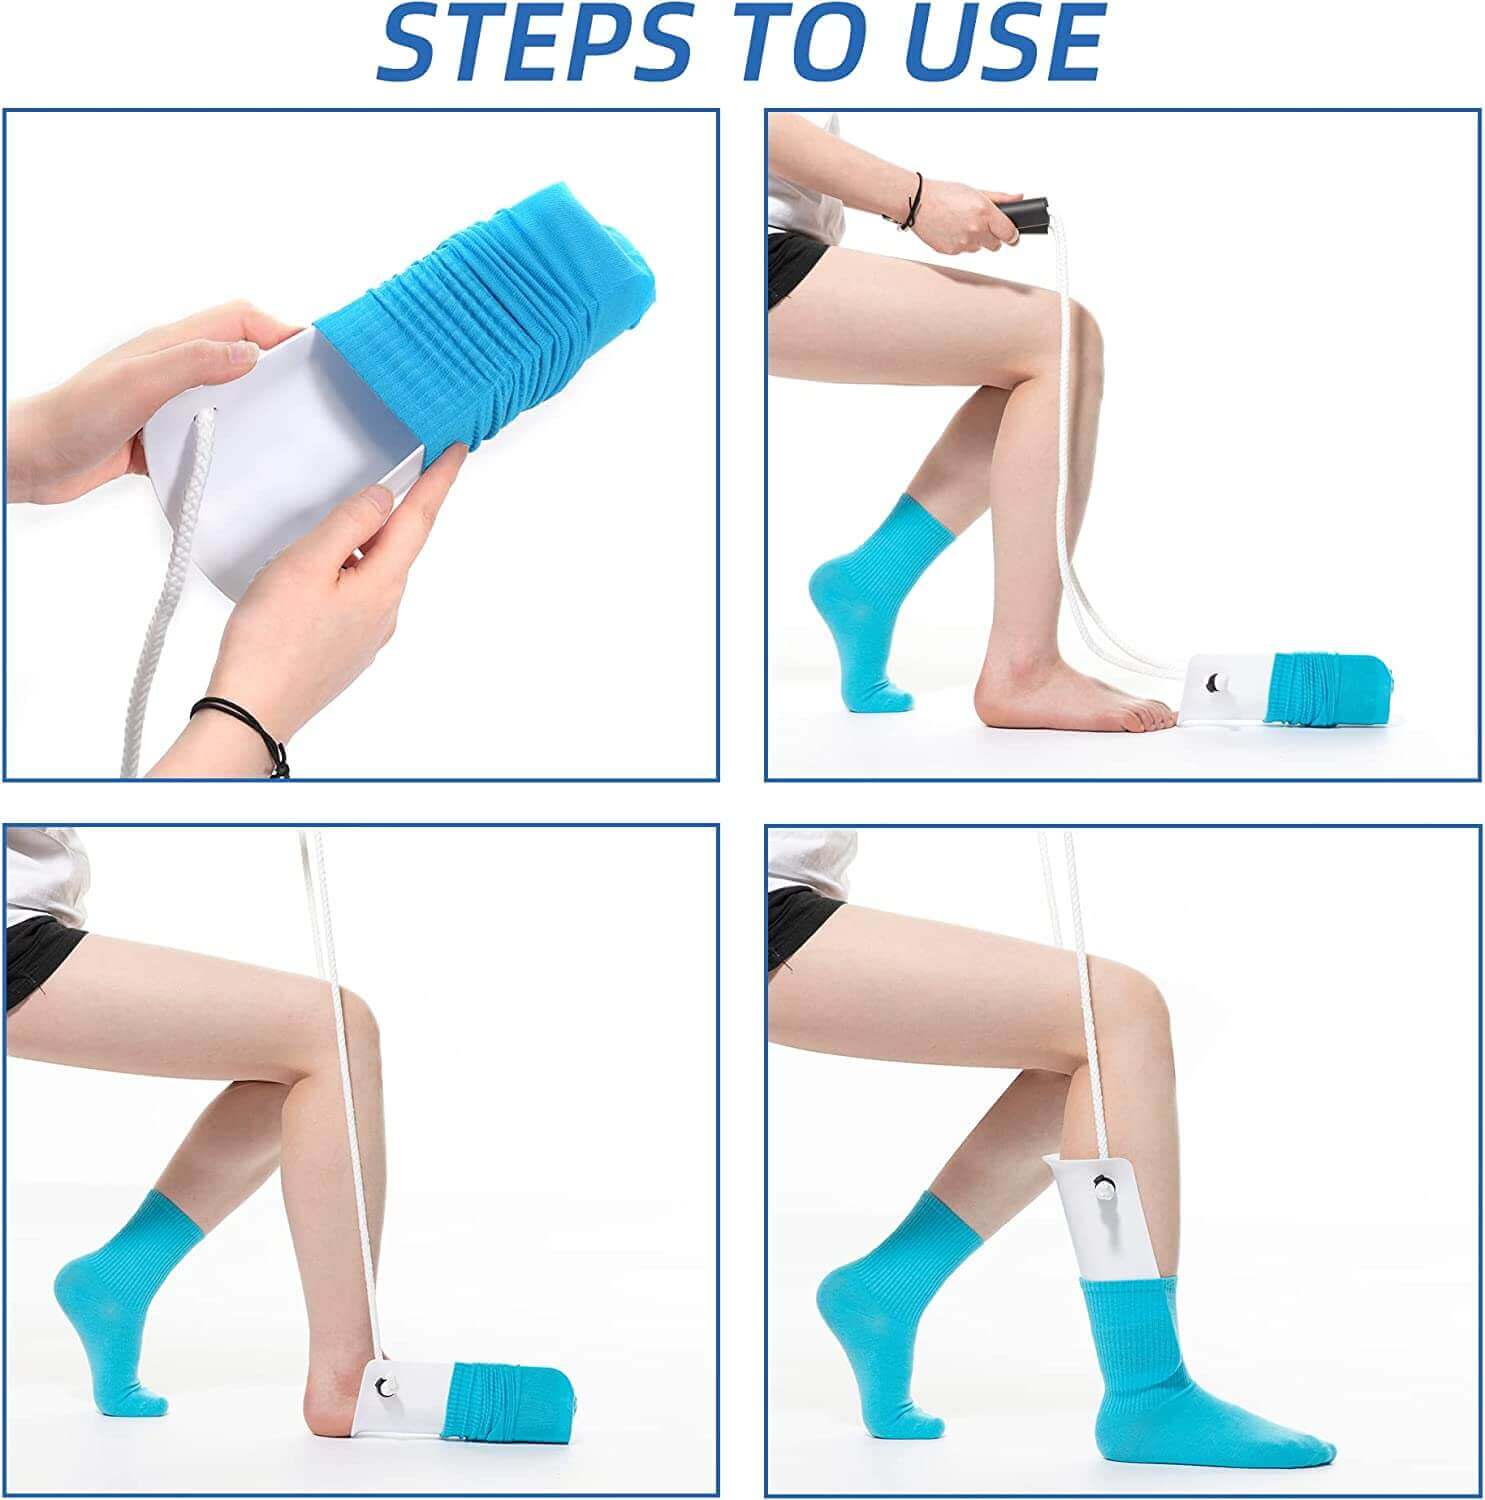 Fanwer Dressing Aid for Socks&Pants, Dressing Assist Tool for Elderly, steps to use the sock aid tool